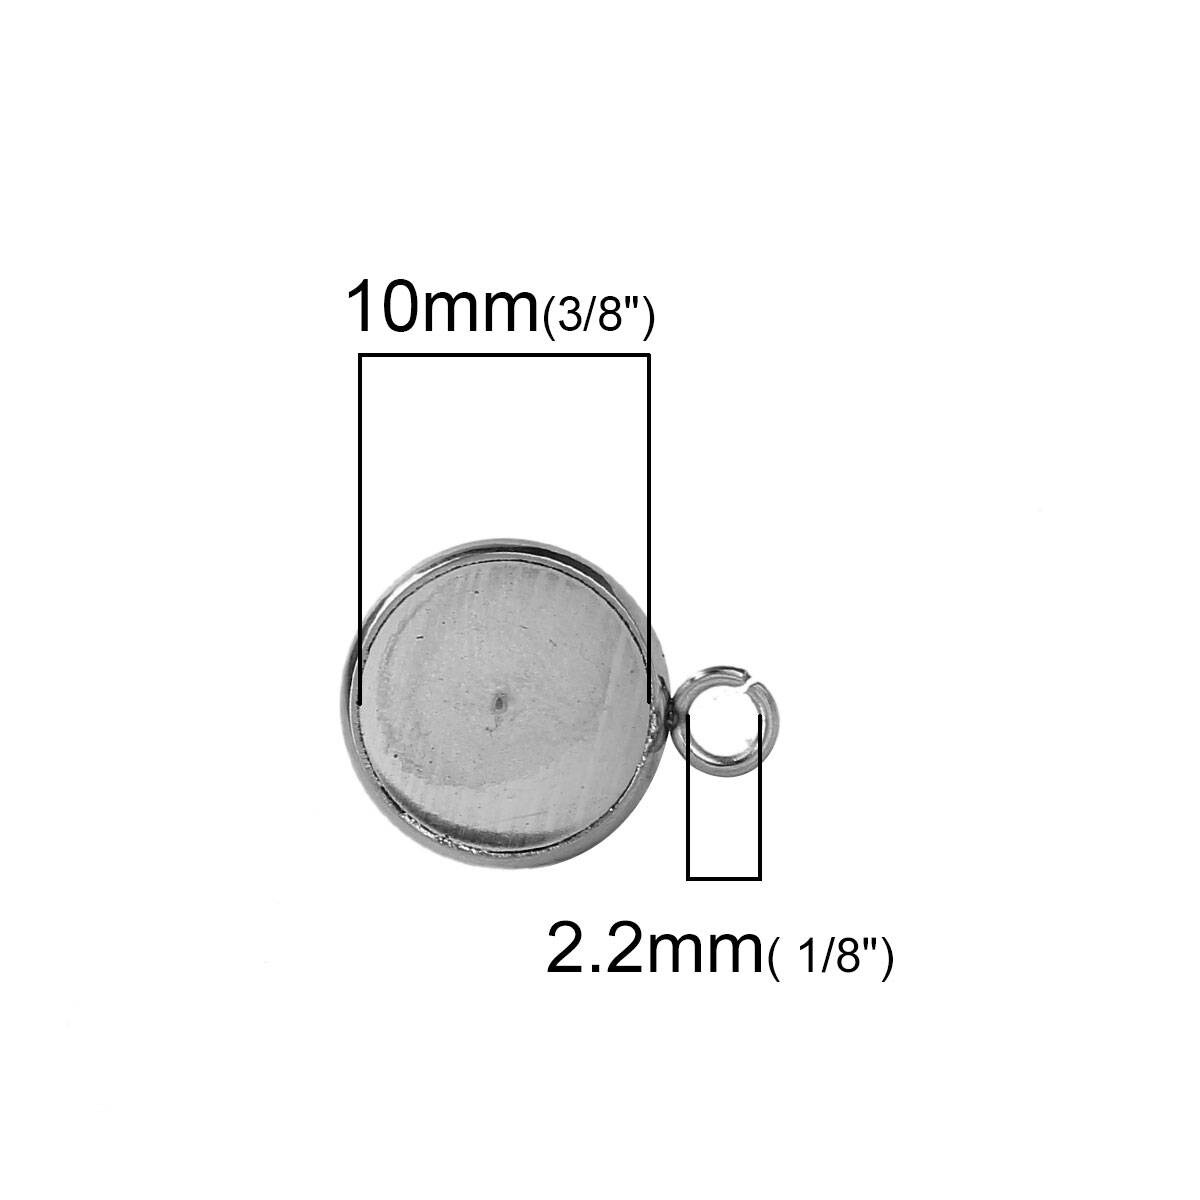 DROLE Stainless Steel Bezels for Earring and Pendant - 200Pcs 10mm Stud  Earring with Post Kit and 40Pcs 30mm Stainless Steel Bezels and Cabochons  for